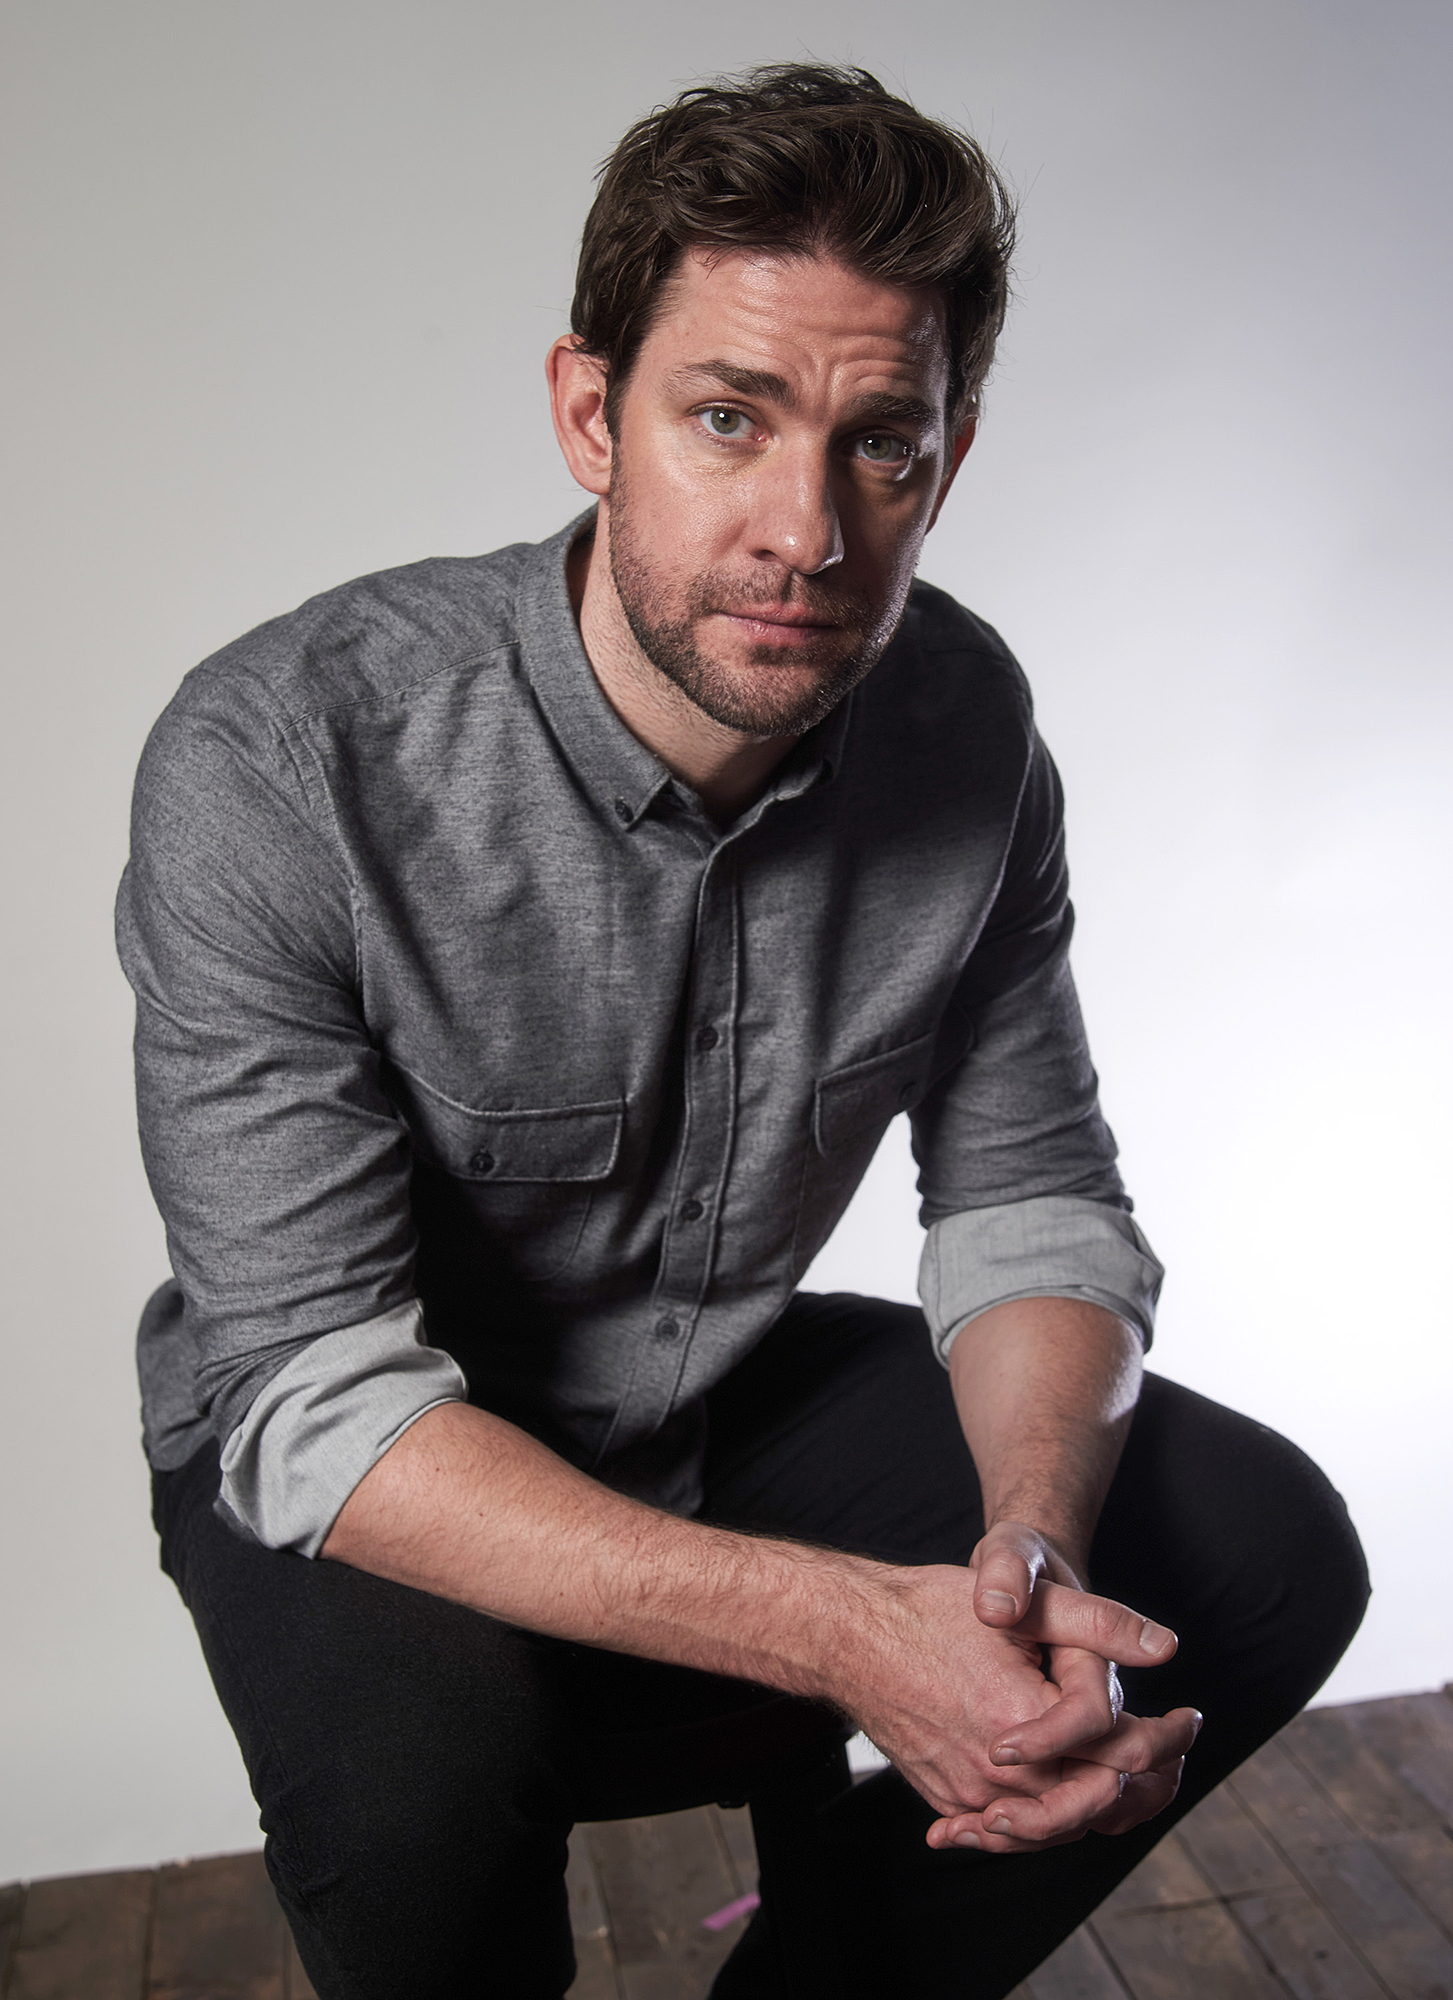 John Krasinski Today: His Transformation Since He Was on 'The Office'